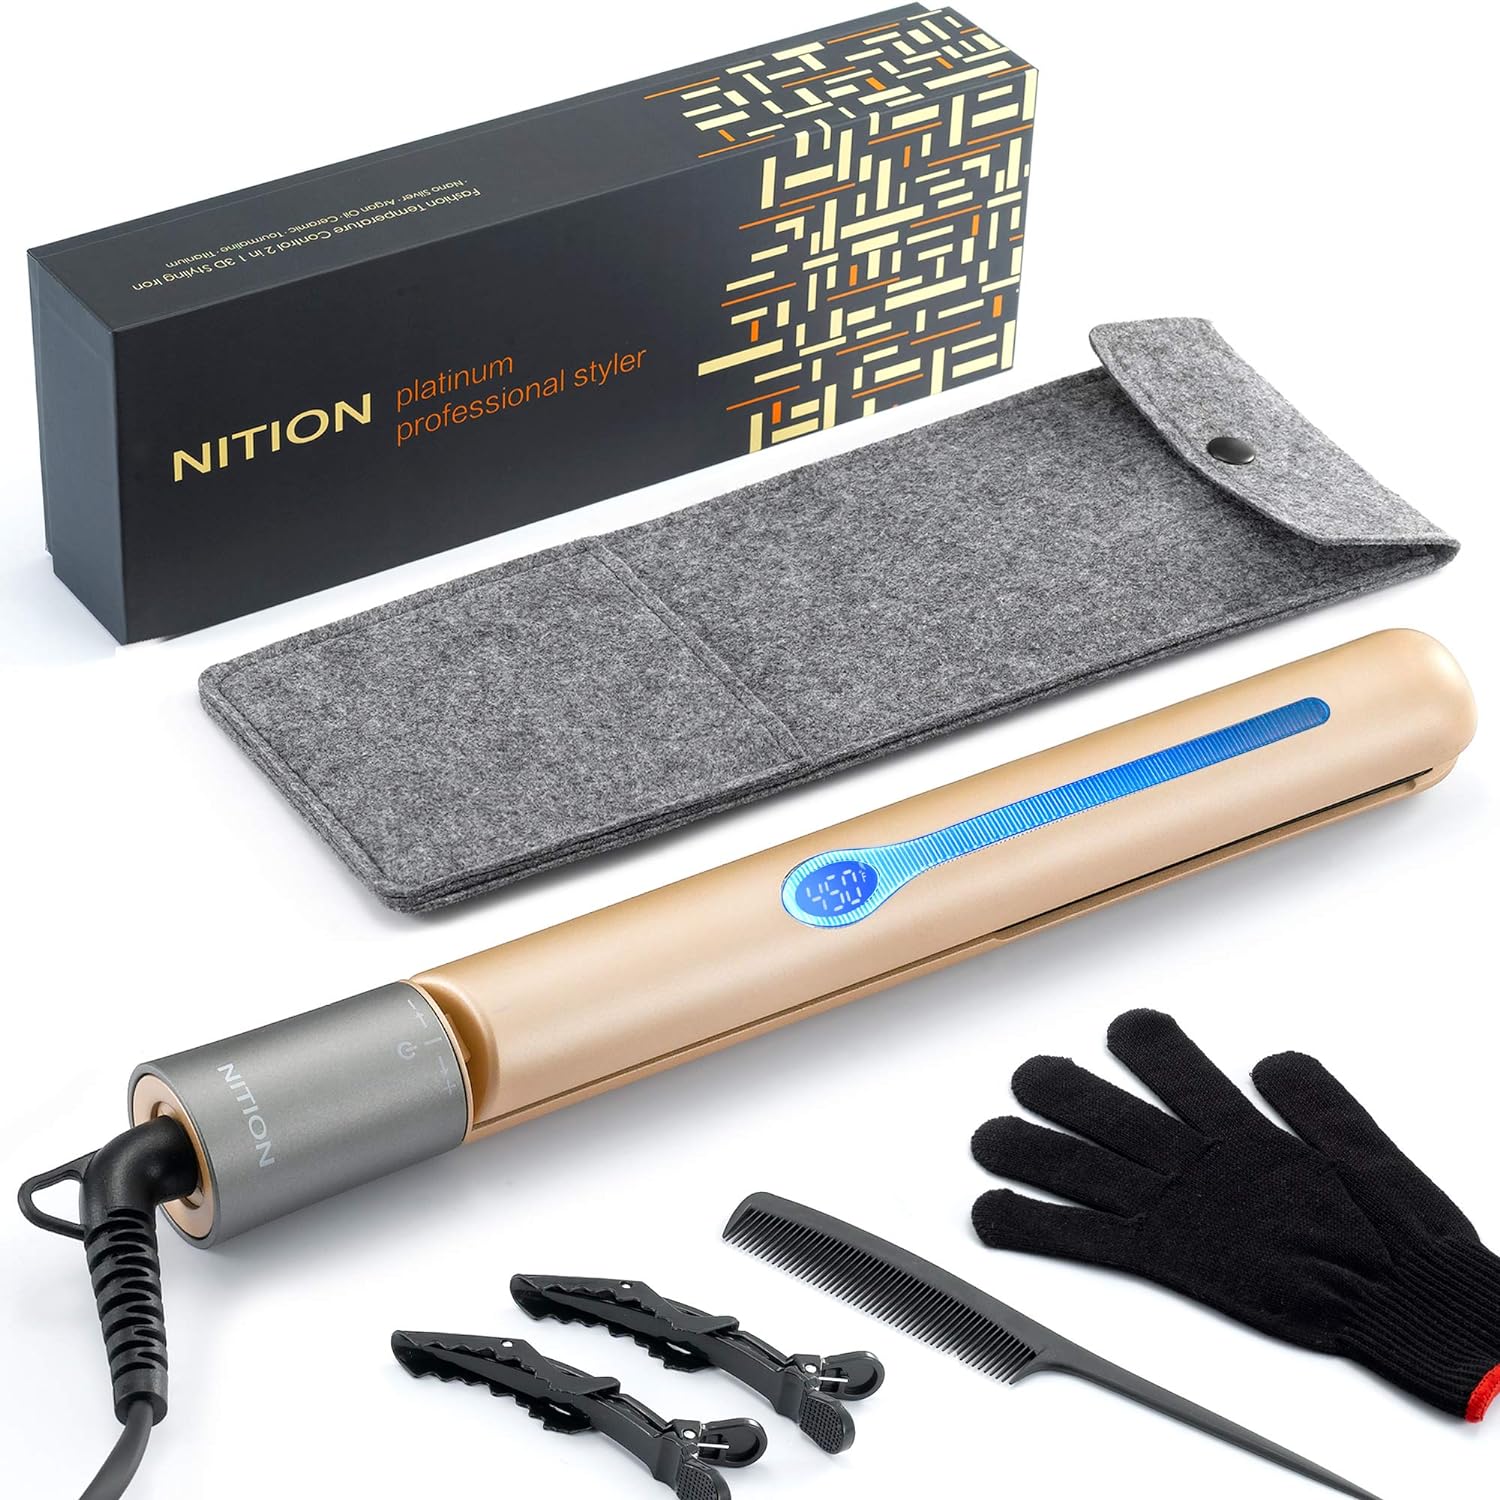 NITION Ceramic Tourmaline Hair Straighteners LCD Flat Iron MCH Fast Straightening. Healthy Styling 265-450°F 6-Temps Adjustable for All Hair Type. 2-in-1 Curling Iron. 1 inch Heating Plate